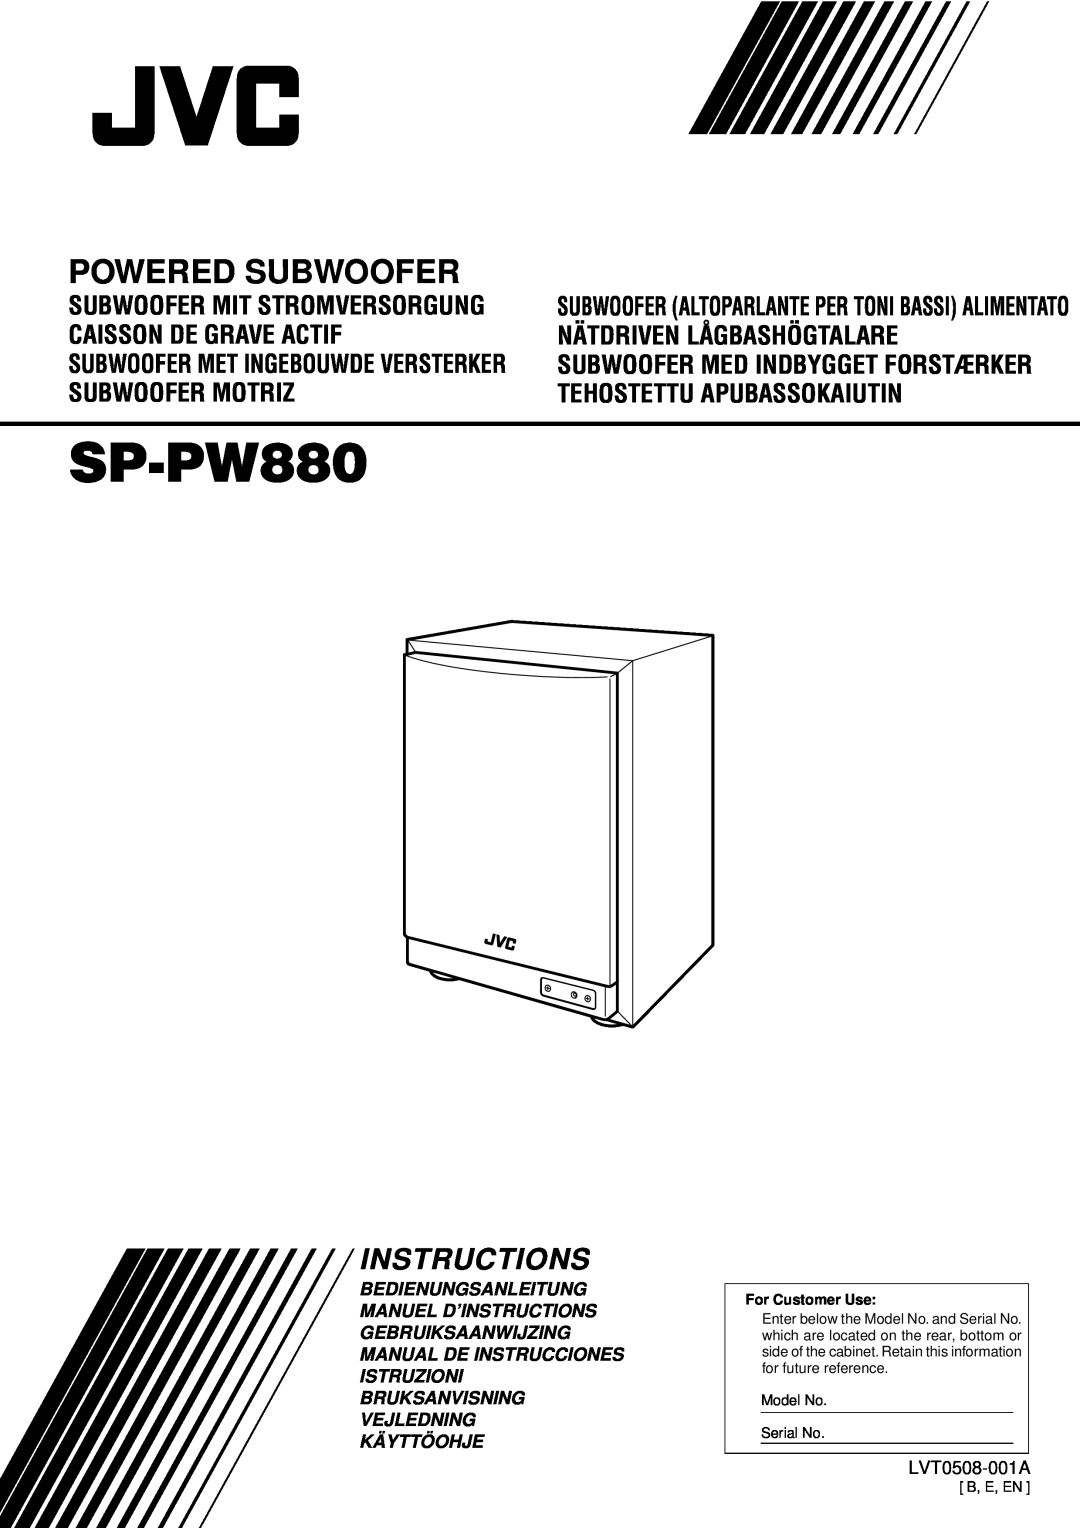 JVC SP-PW880 manual Compact Component System, Powered Subwoofer, Instructions, LVT0508-001A 